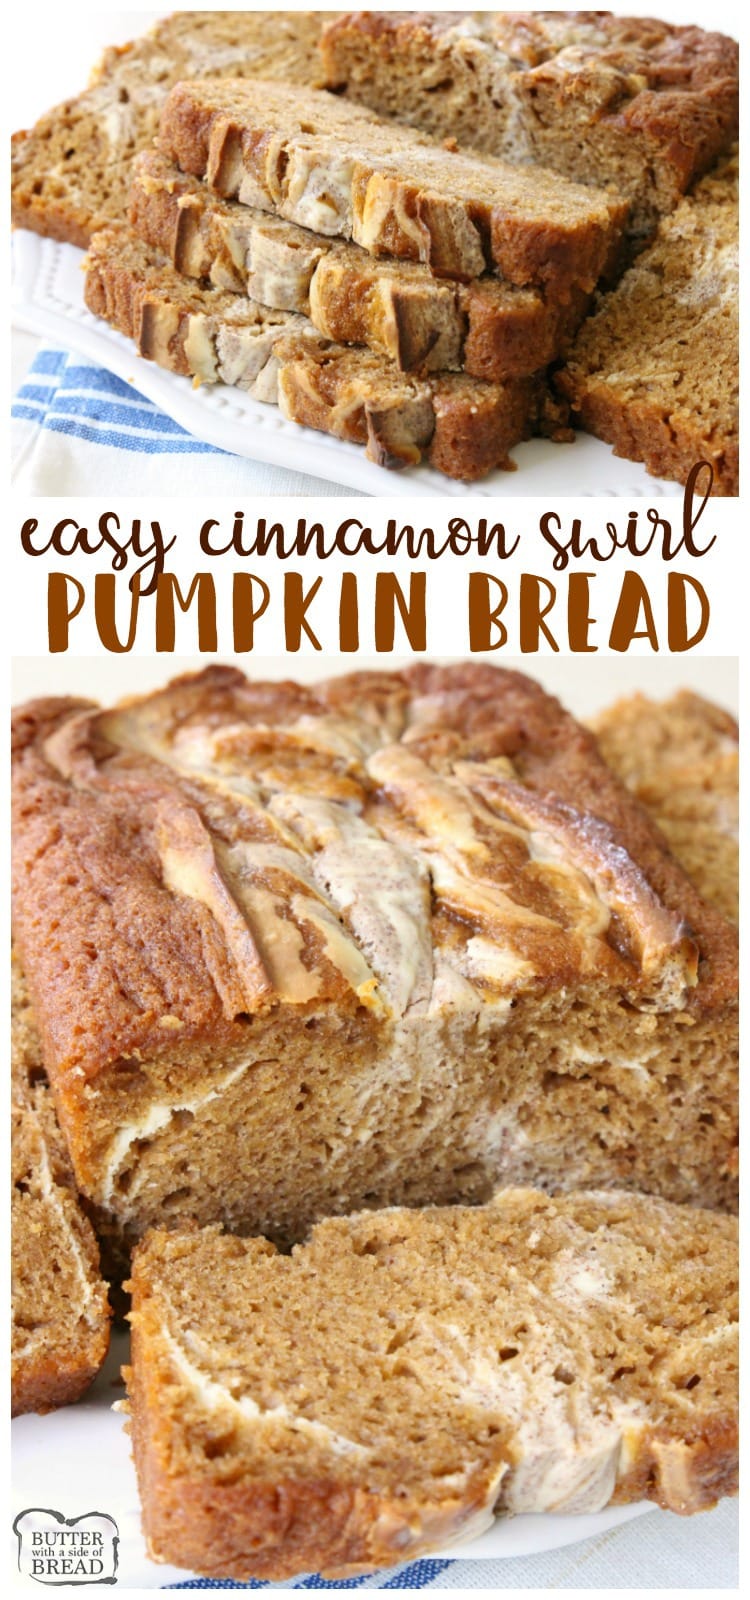 Cinnamon Swirl Pumpkin Bread is a delightful twist on a classic that incorporates a sweet cream cheese and cinnamon swirled into a soft #pumpkin #bread. Easy #quickbread #recipe from Butter With A Side of Bread